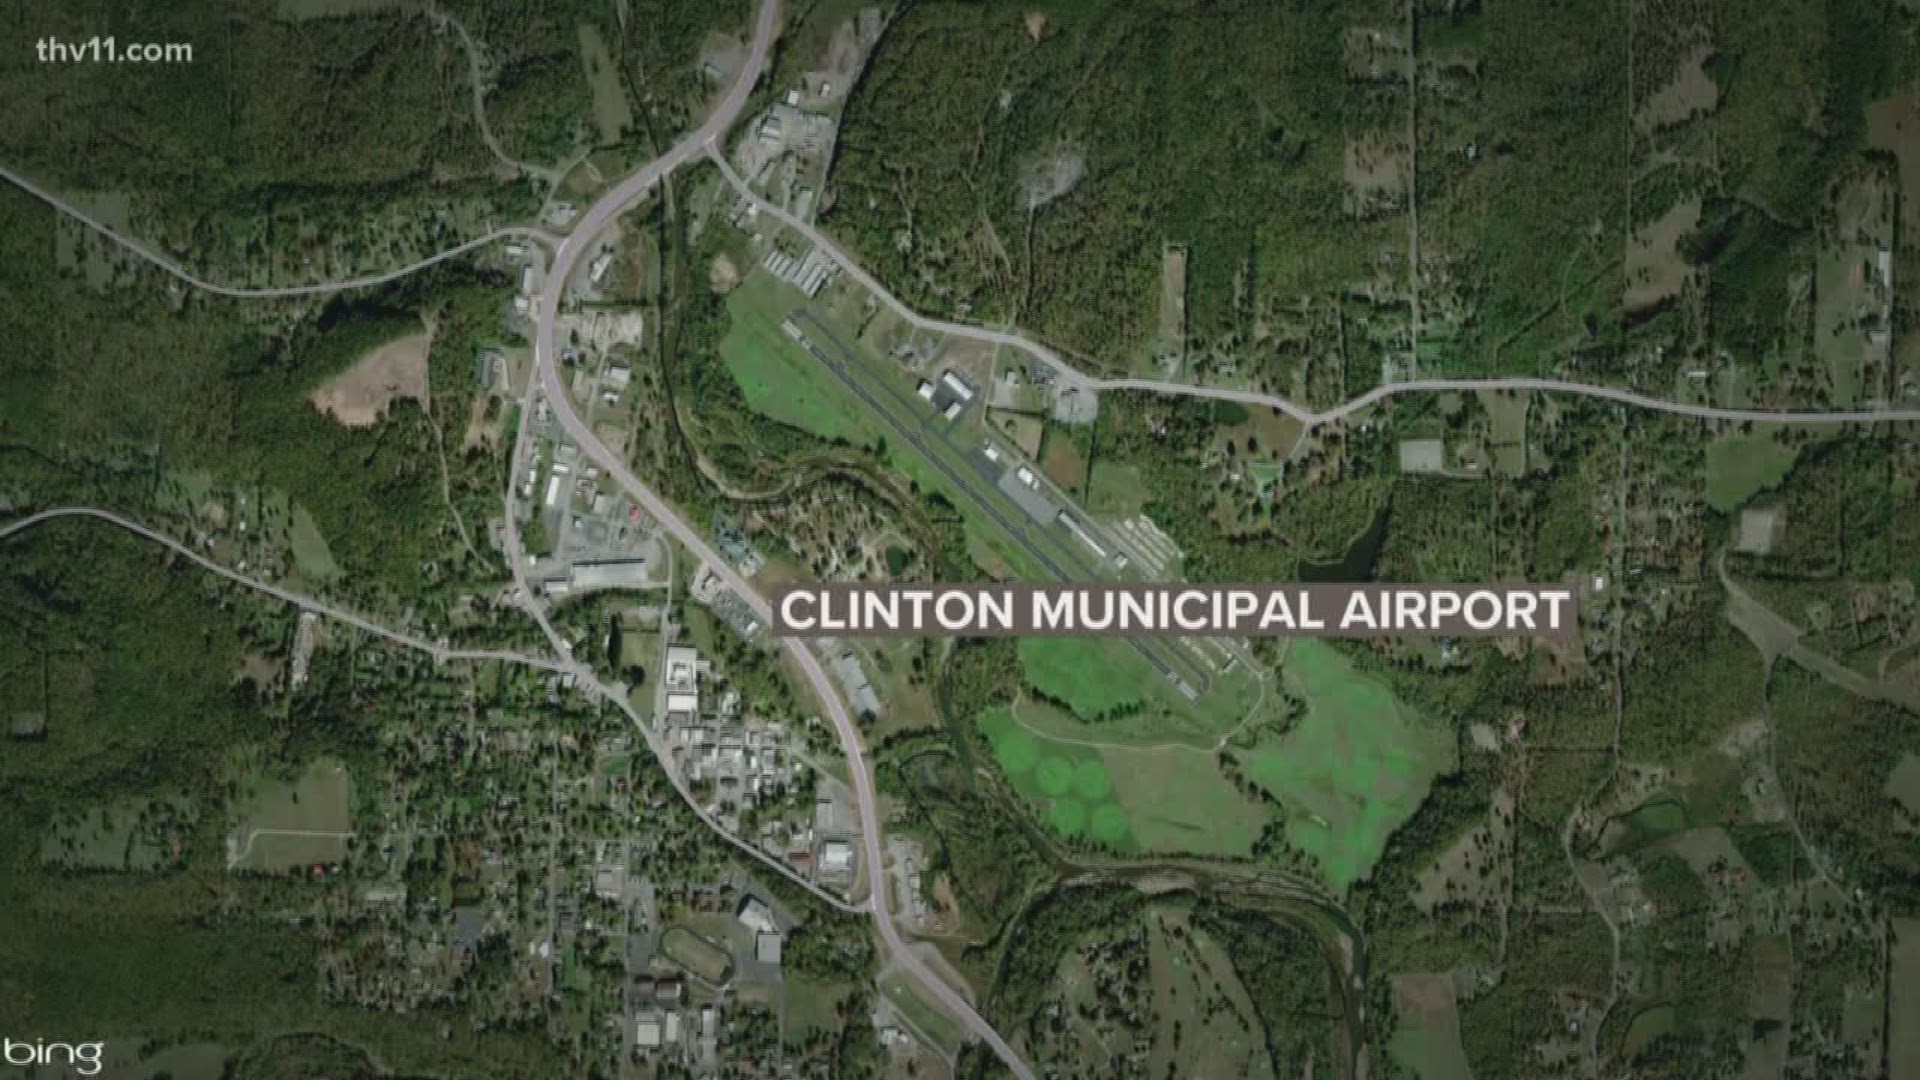 Two adults and one child are recovering in a Little Rock hospital after a small plane crashed near the Clinton Municipal Airport in Van Buren County.